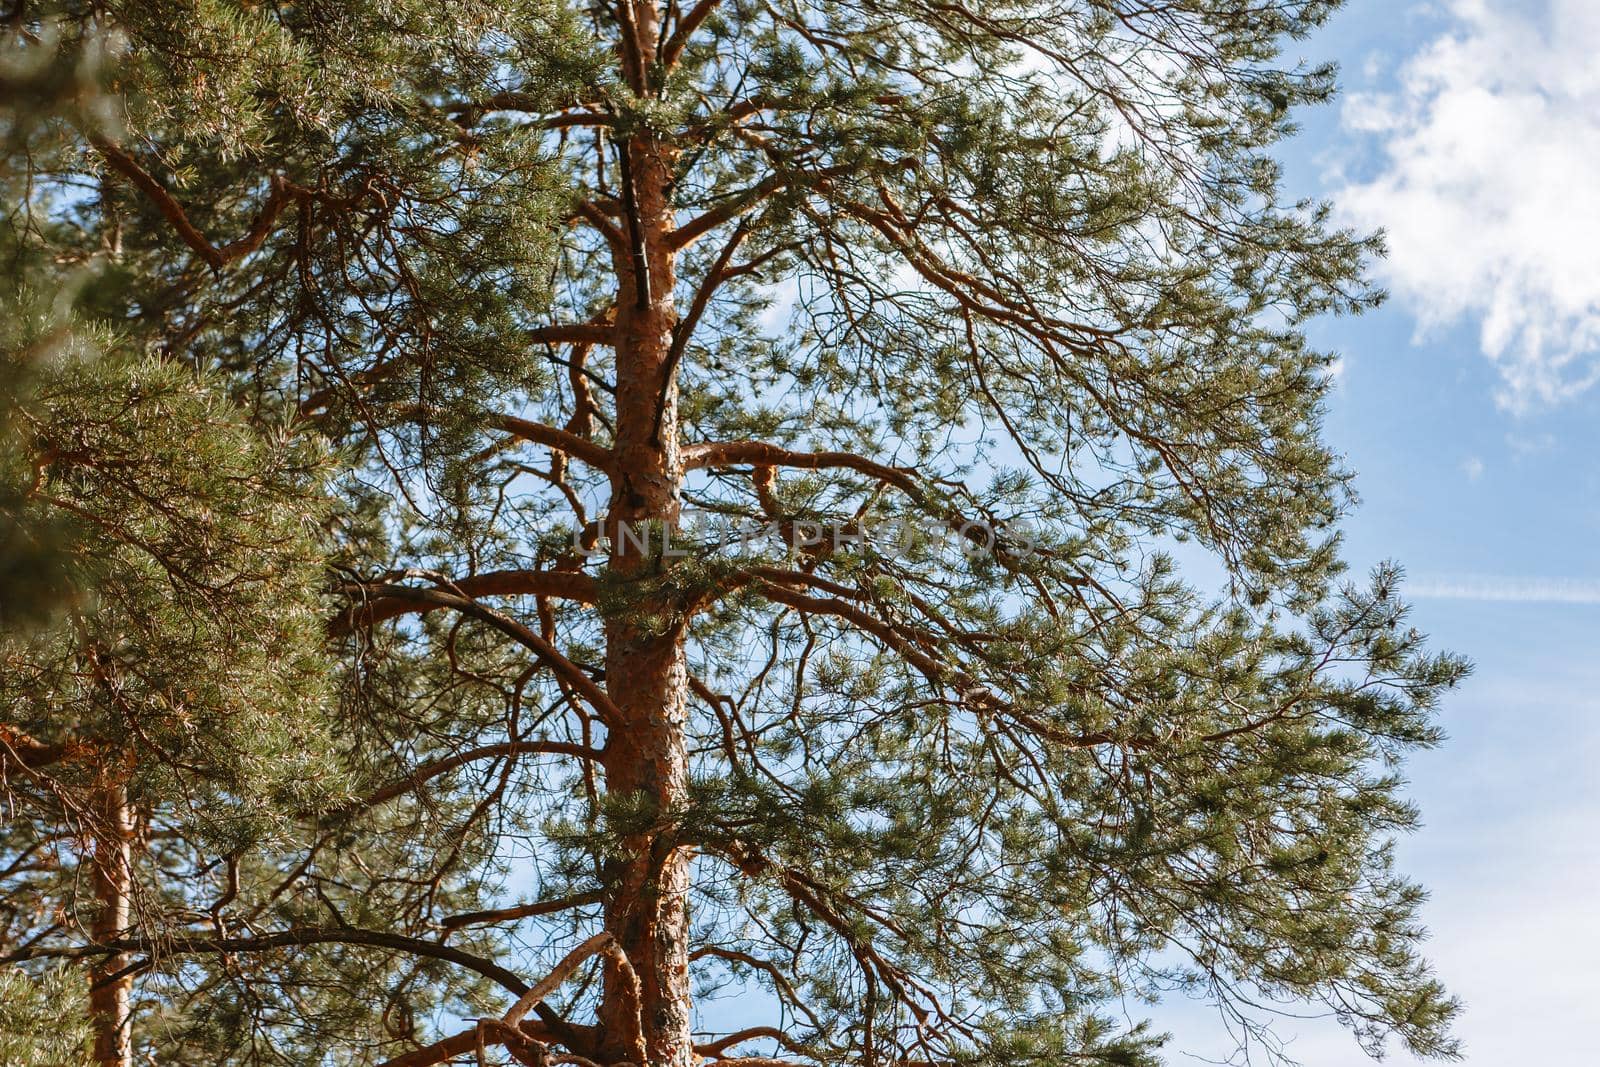 Pine trees standing in the forest. Shooting from bottom to top